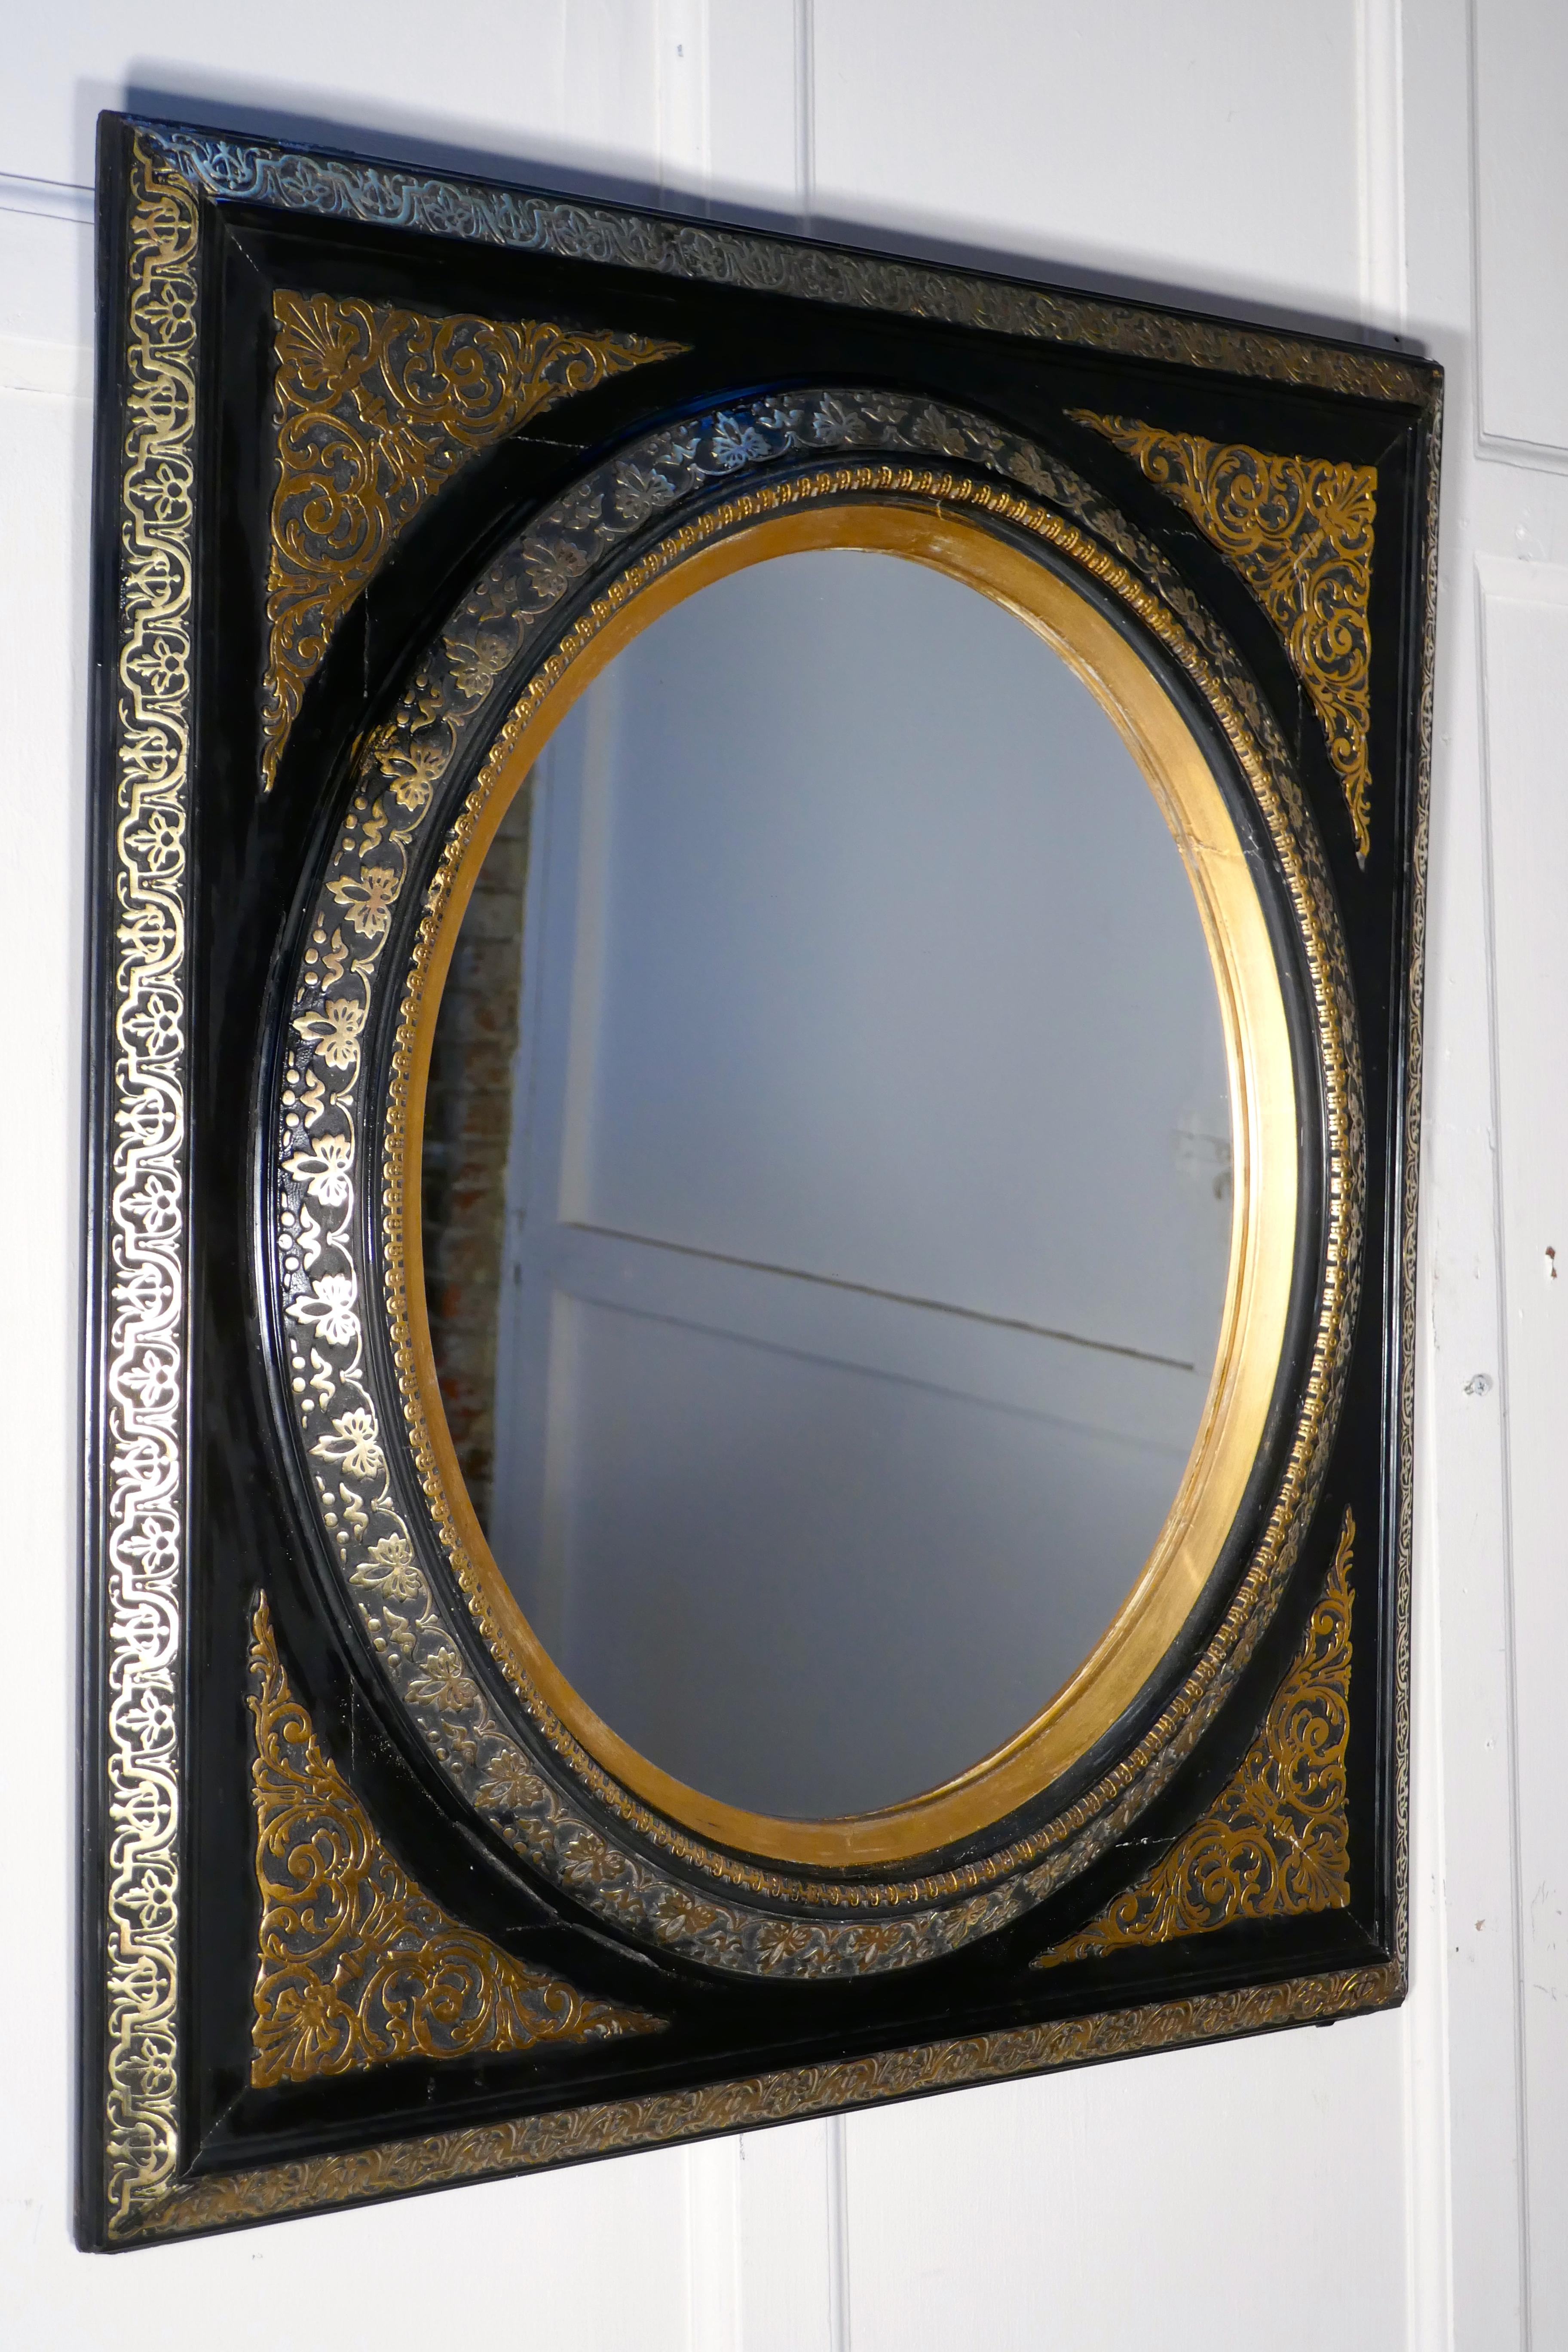 Stunning French Empire Gilt and Lacquer Wall Mirror 1